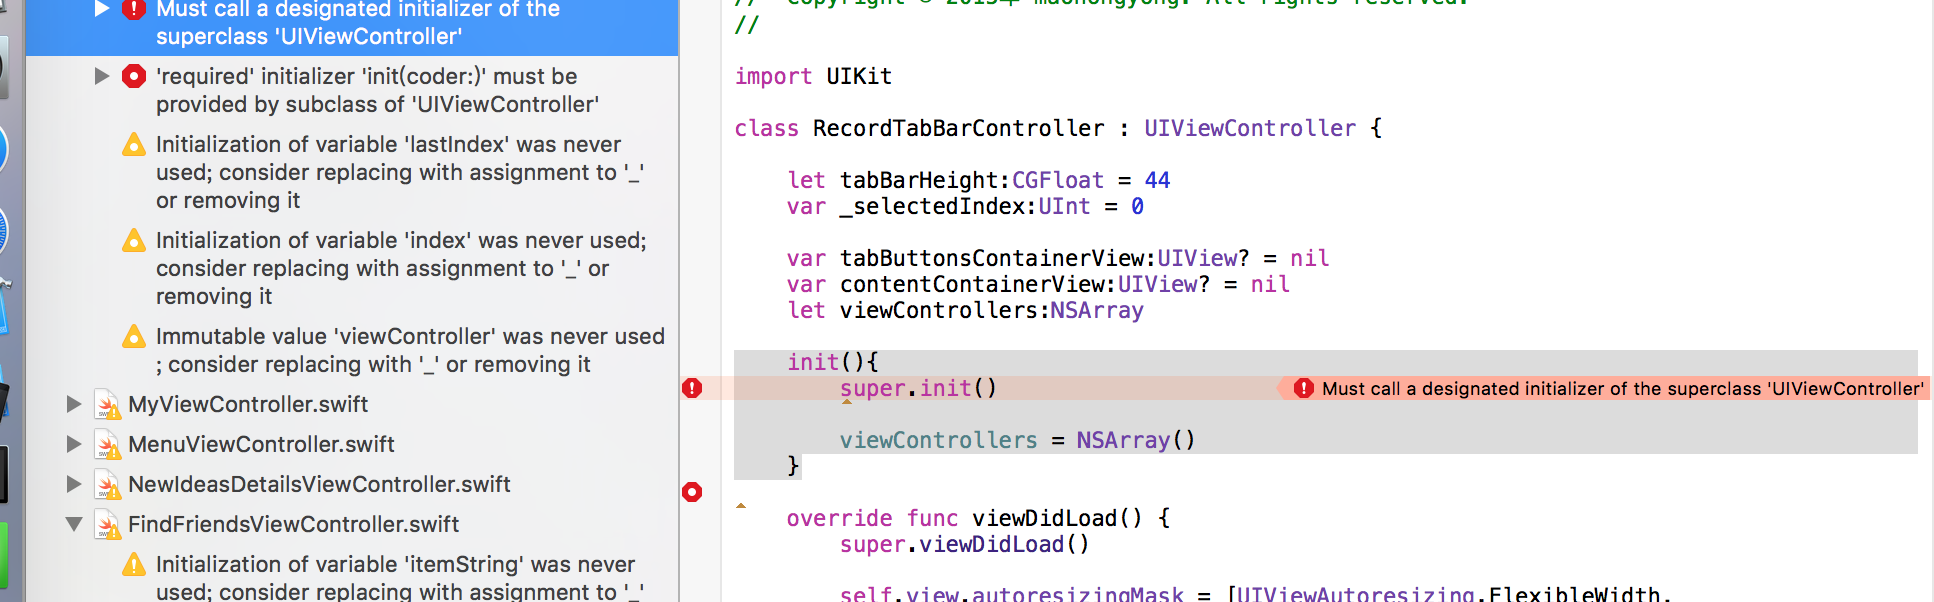 Must call a designated initializer of the superclass UIViewController